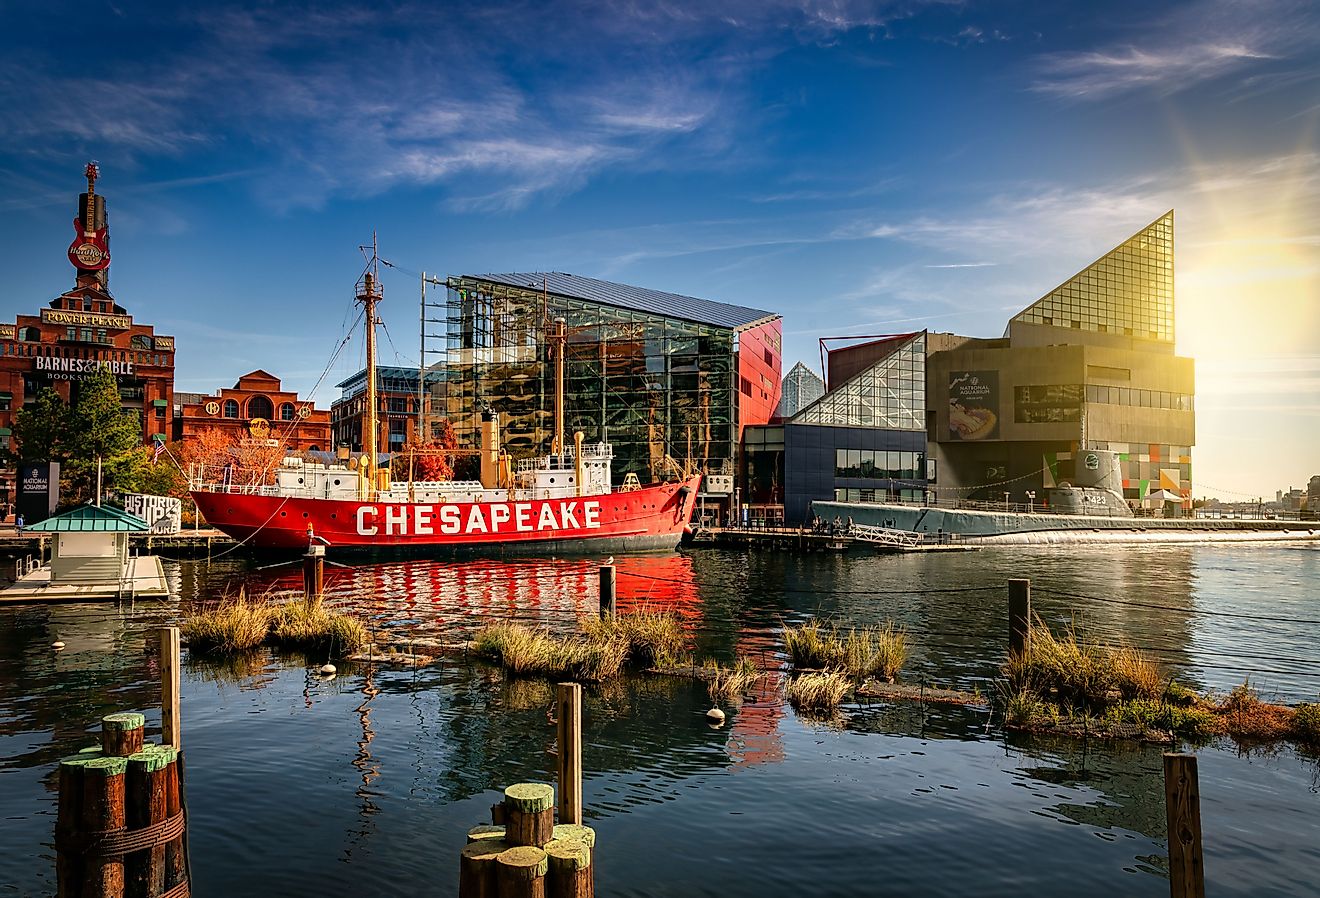 The lightship Chesapeake, belonging to the National Park Service, moored at the Inner Harbor in Baltimore. Image credit Bill Chizek via Shutterstock.